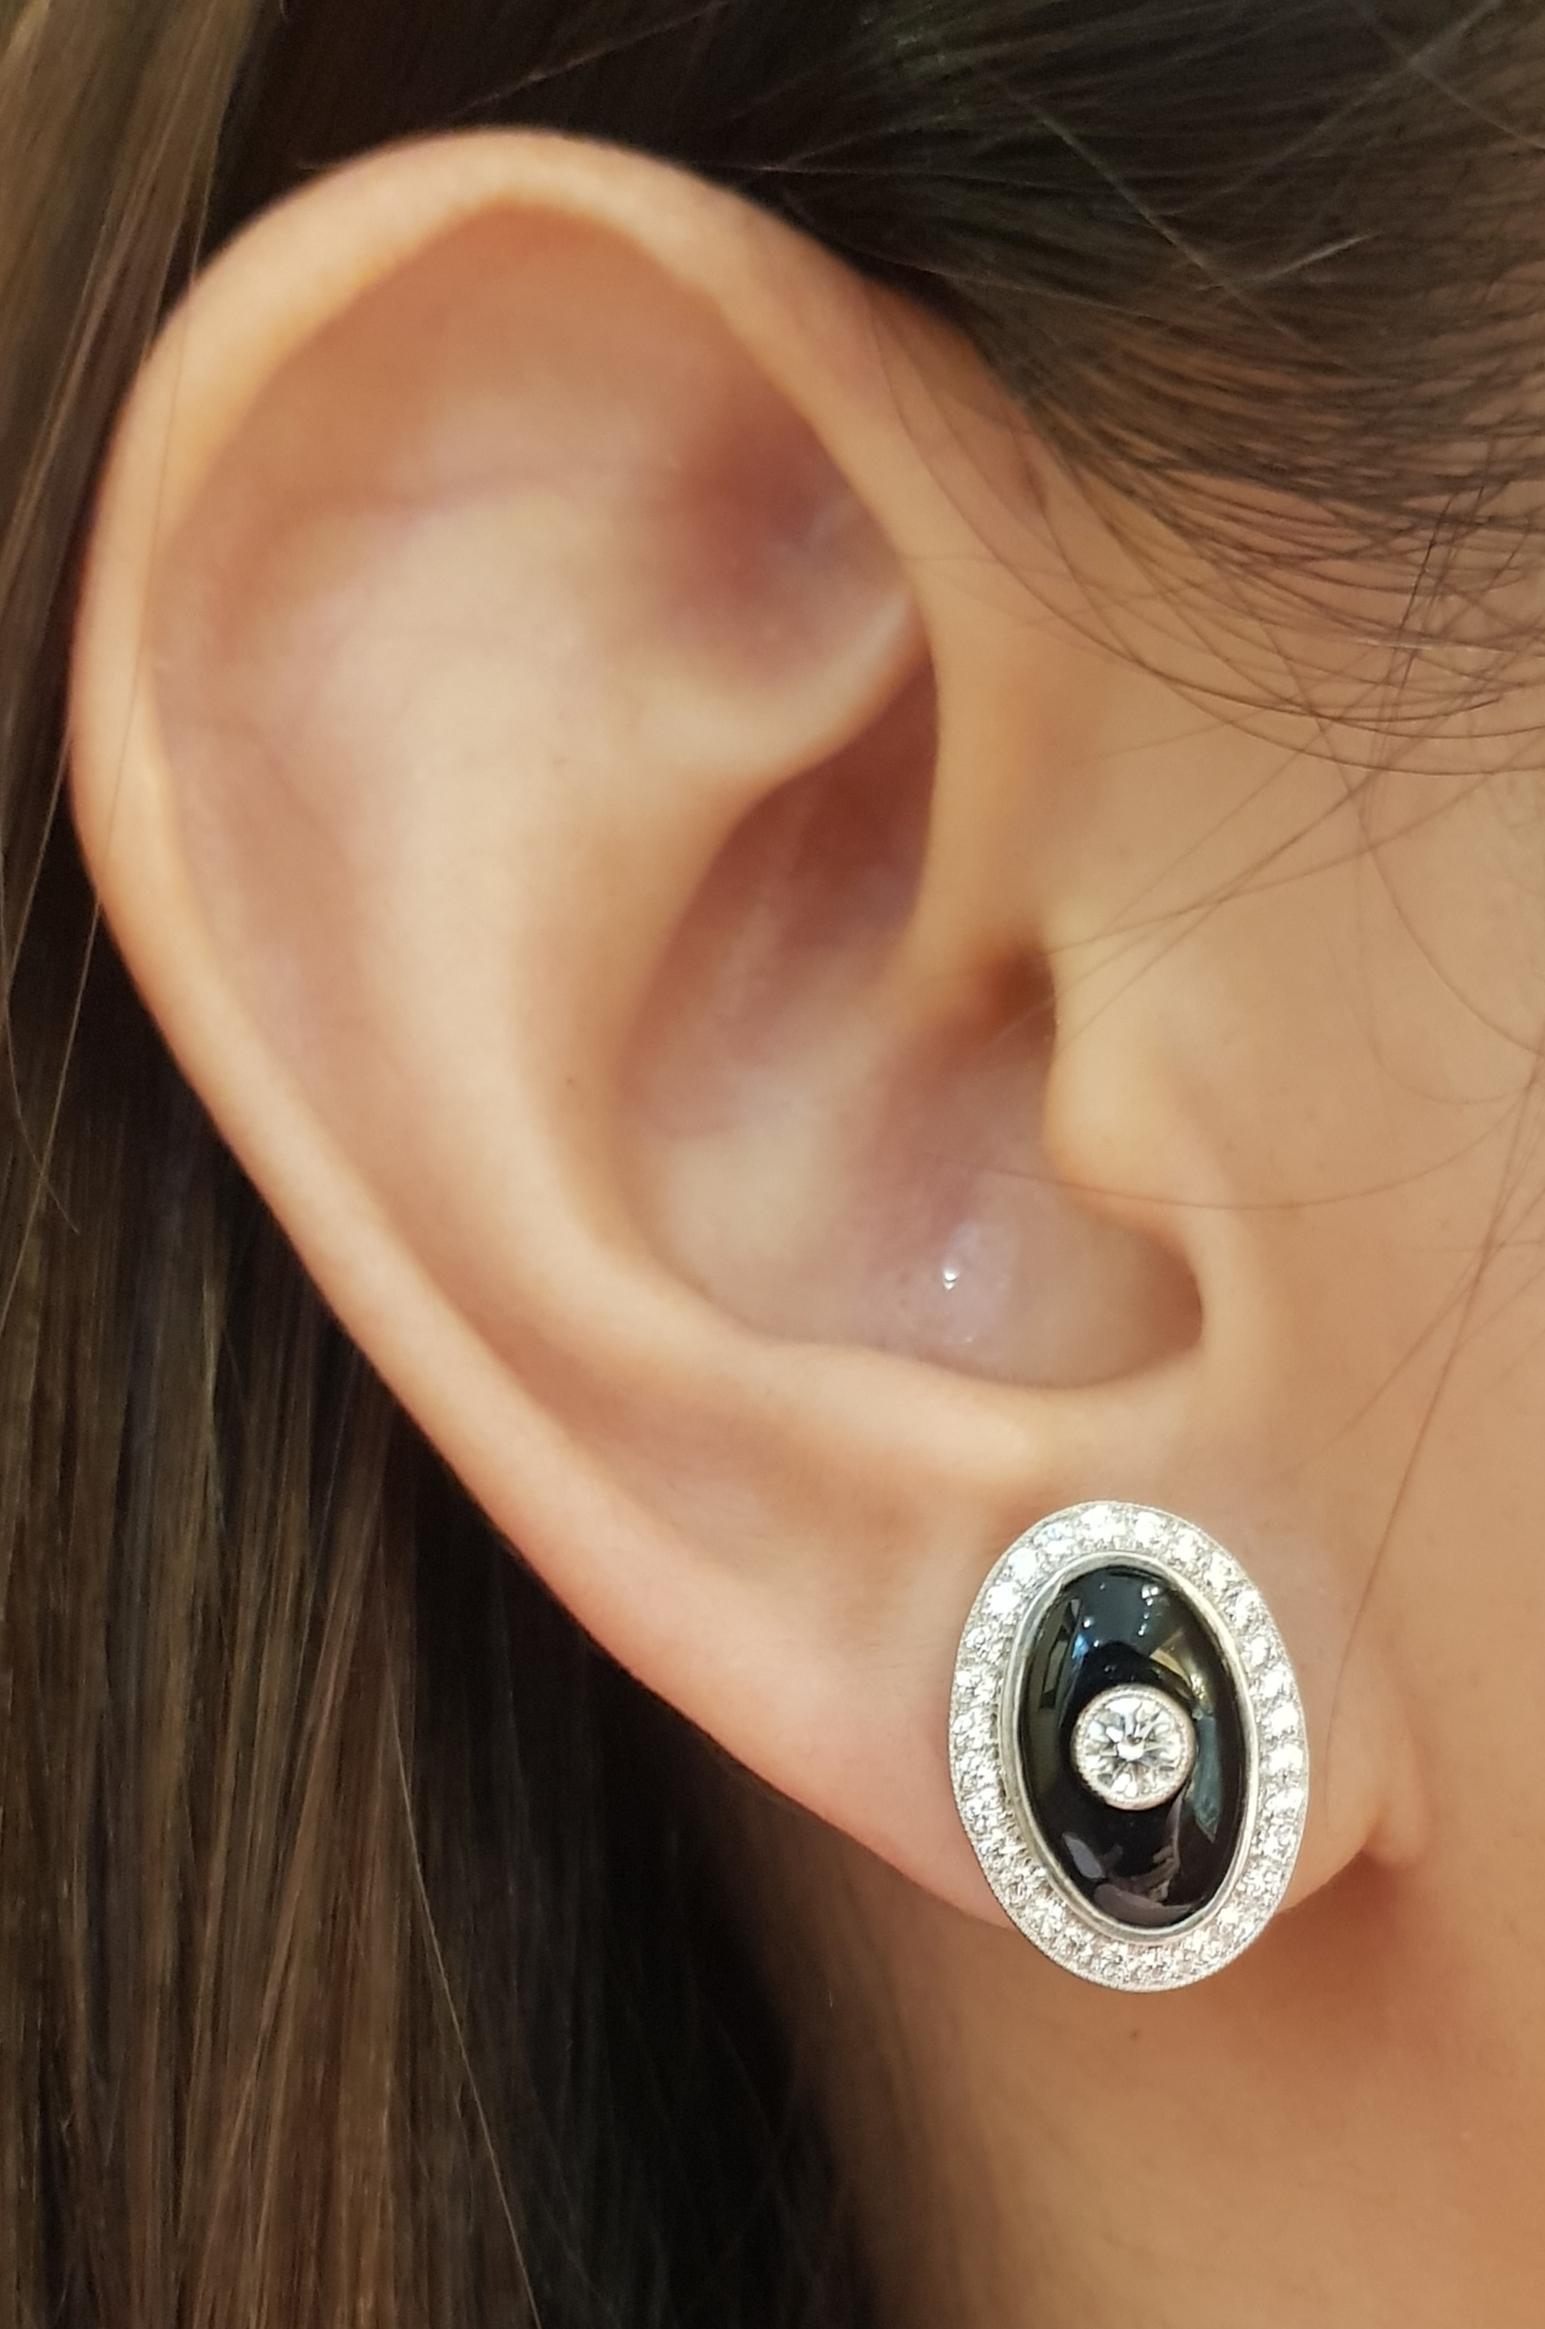 Onyx with Diamond 0.71 carats Earrings set in 18 Karat White Gold Settings

Width:   1.20 cm 
Length:  1.70 cm
Total Weight: 7.61 grams

